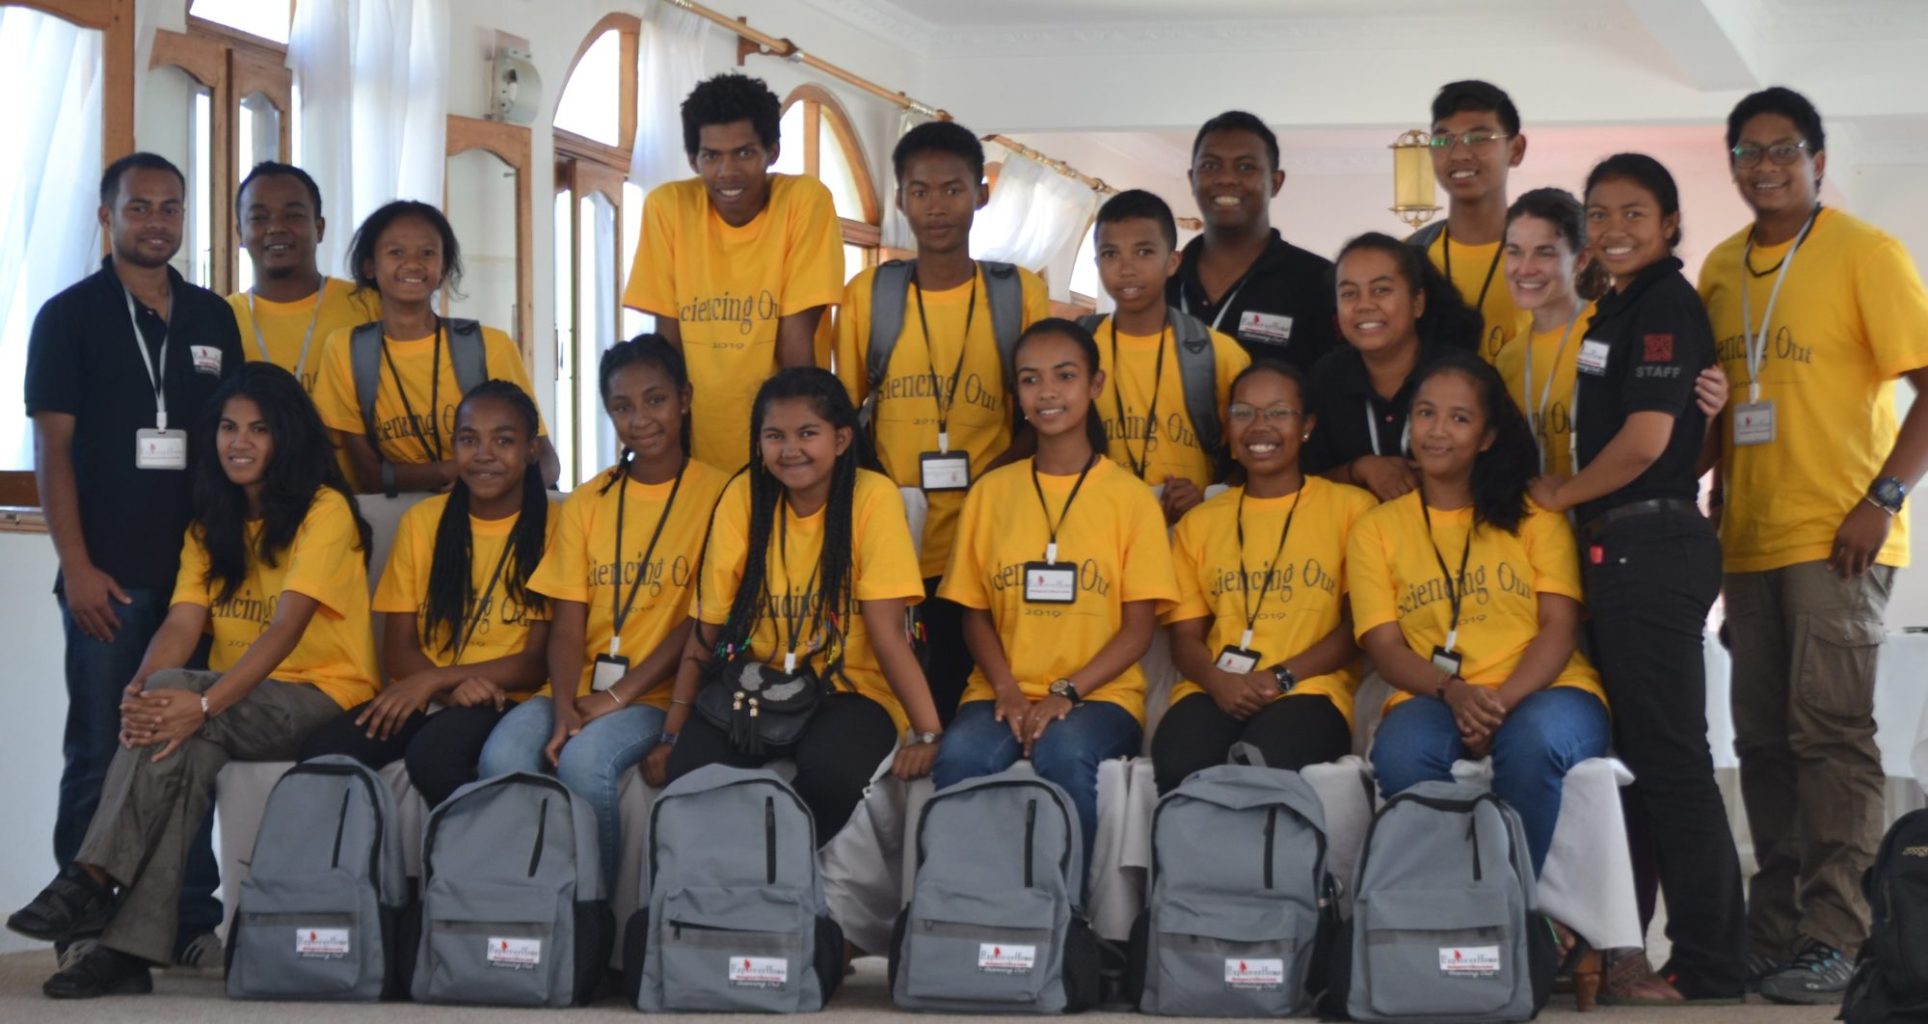 A group shot of students wearing lanyards and holding backpacks.